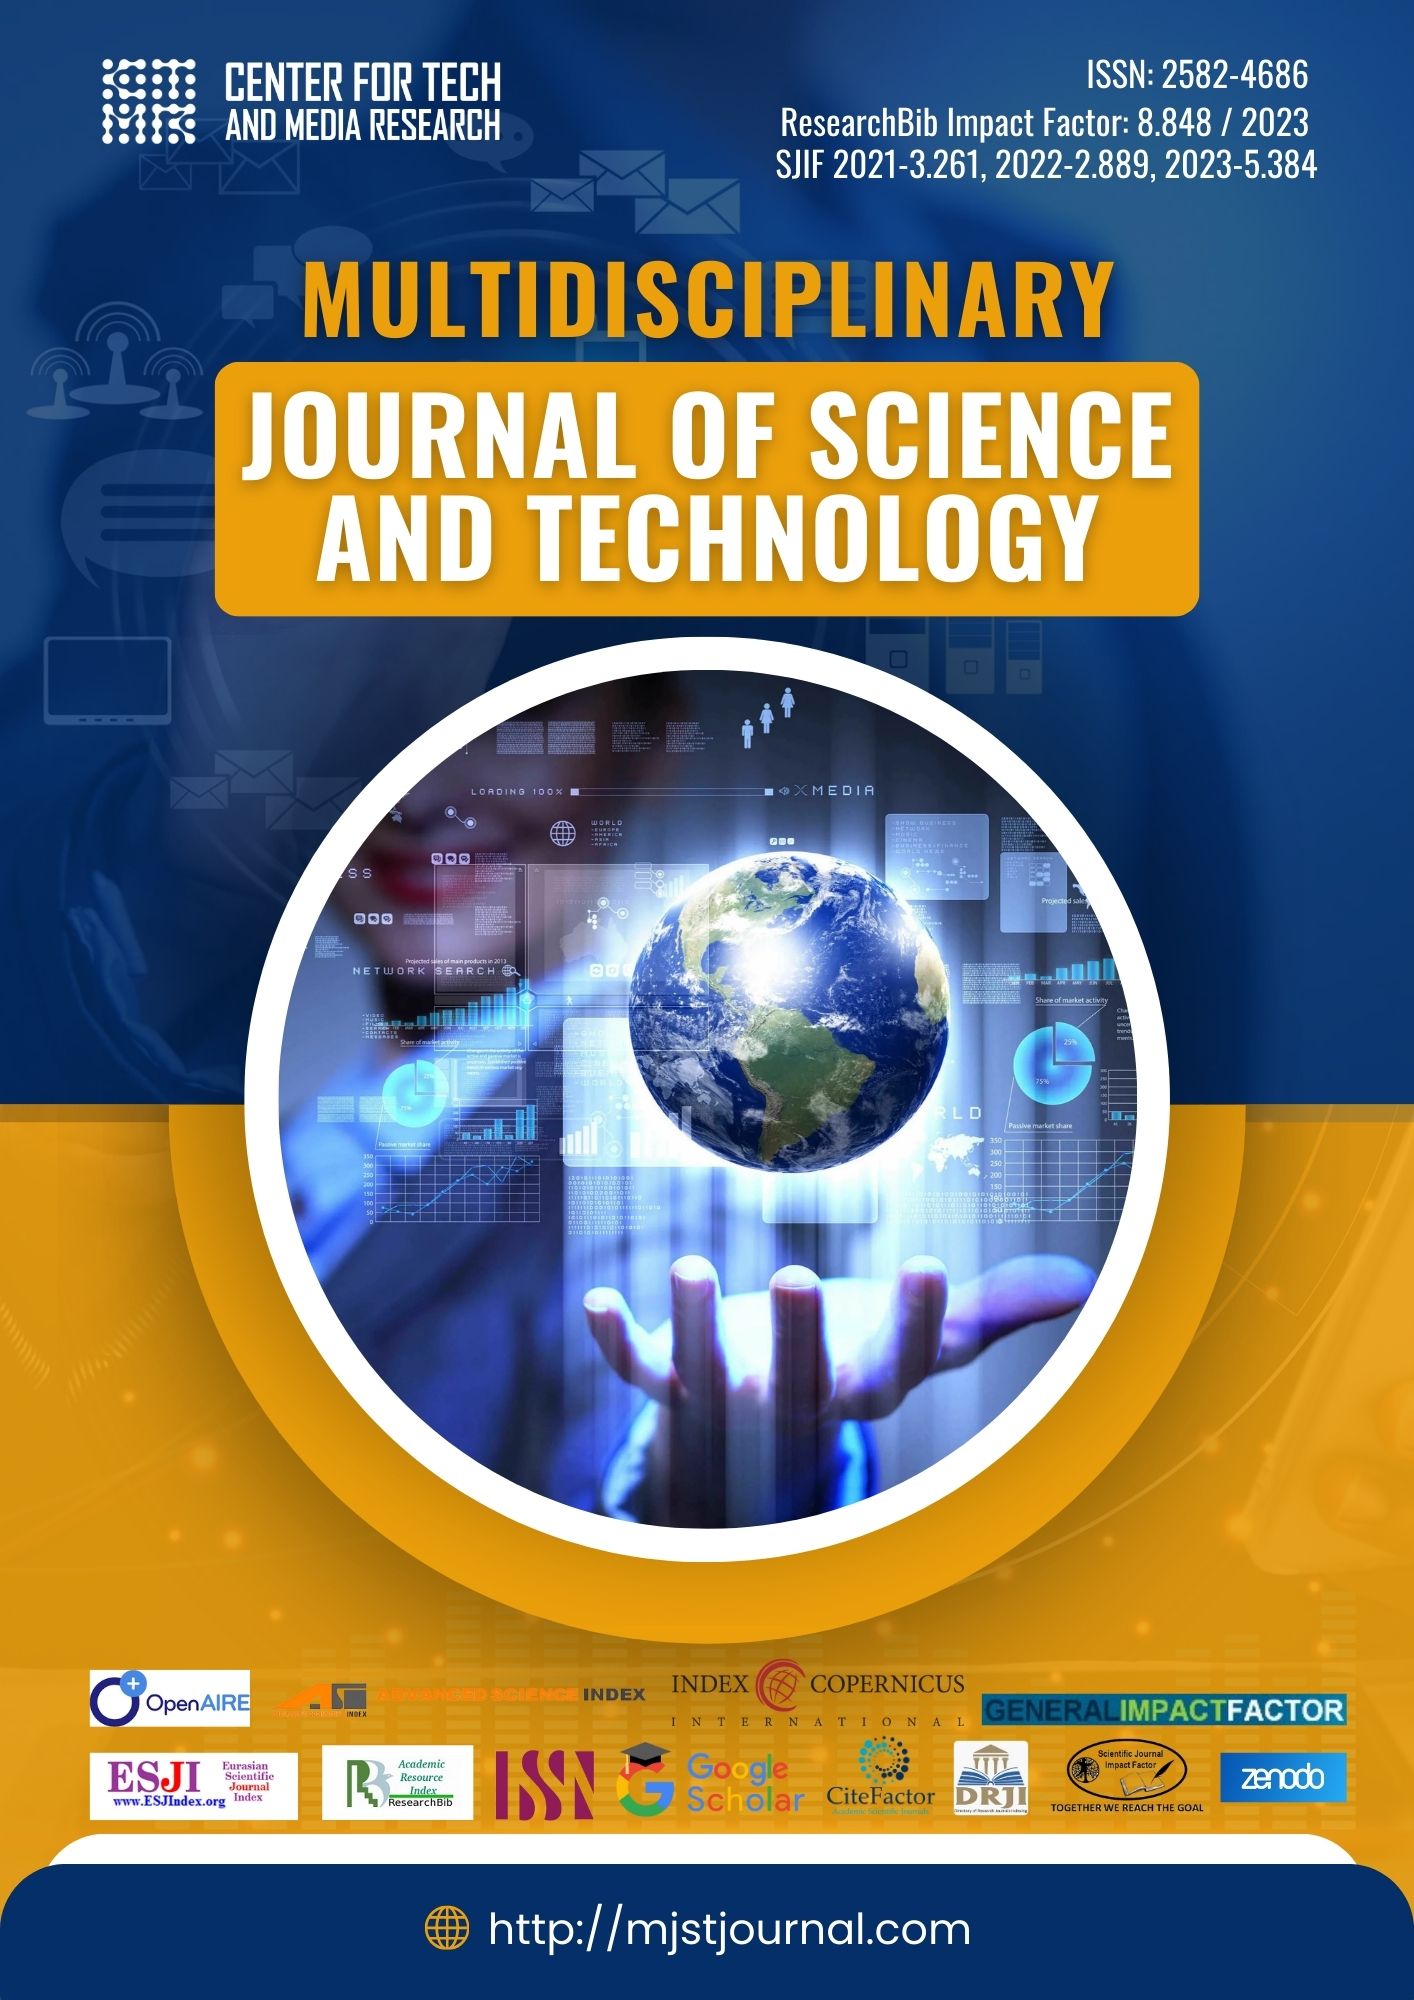                         View खंड 4 No. 5 (2024): MULTIDISCIPLINARY JOURNAL OF SCIENCE AND TECHNOLOGY
                    